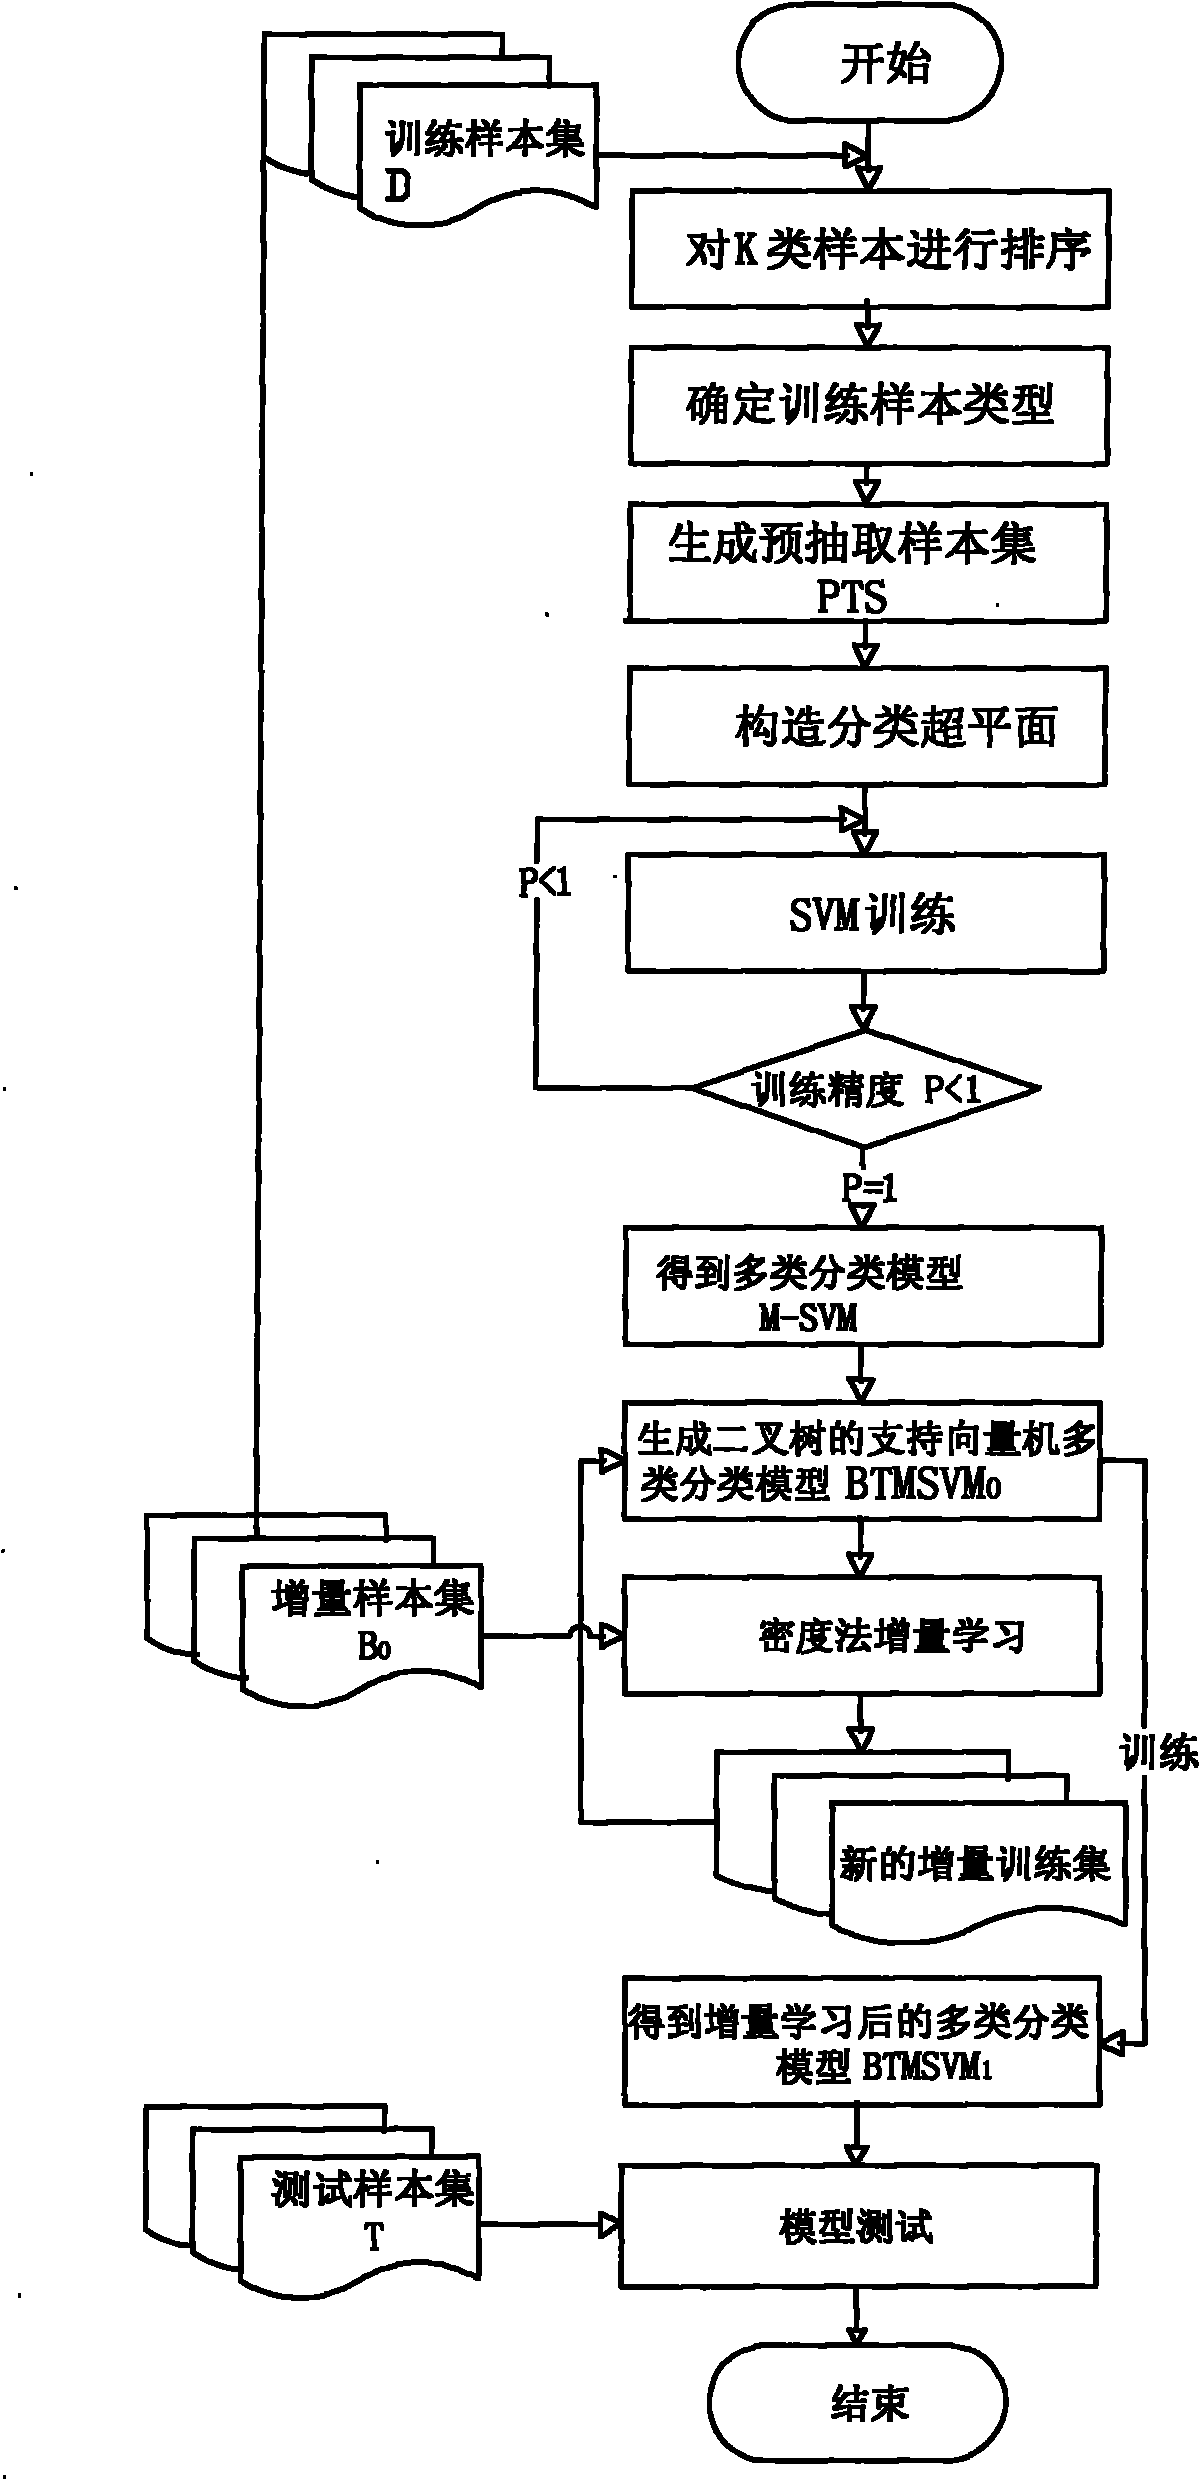 Incremental learning-fused support vector machine multi-class classification method